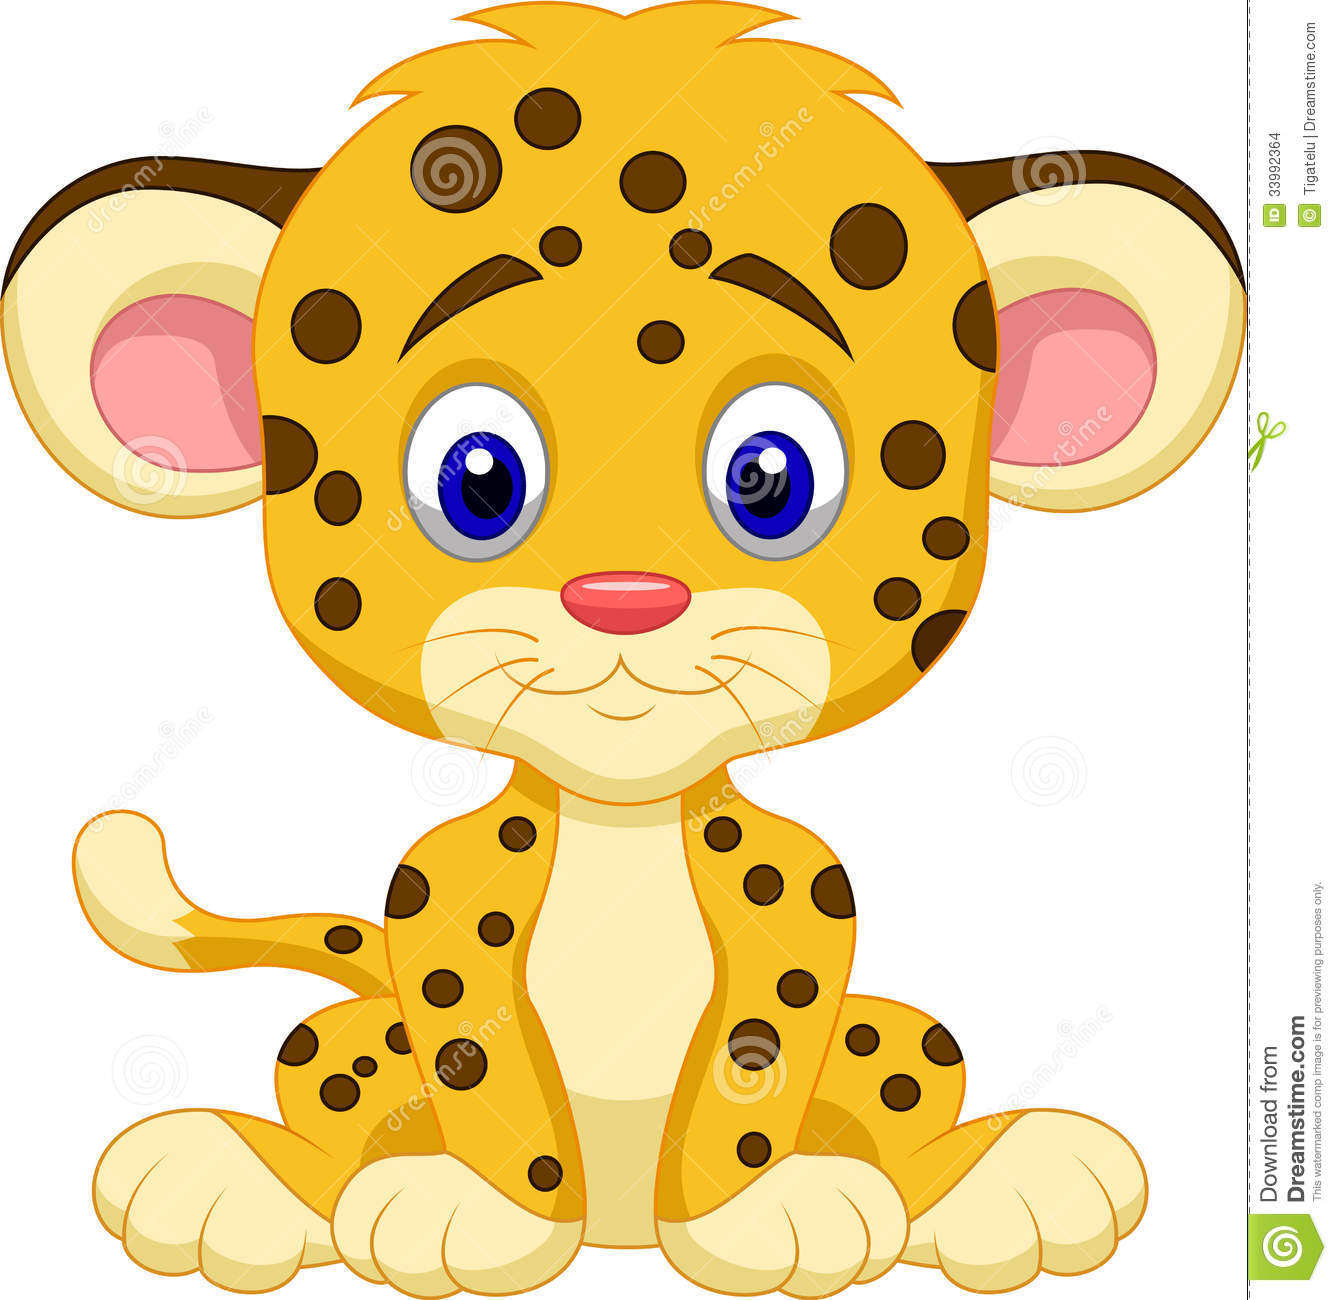 Baby Leopard Cartoon Stock Images   Image  33992364